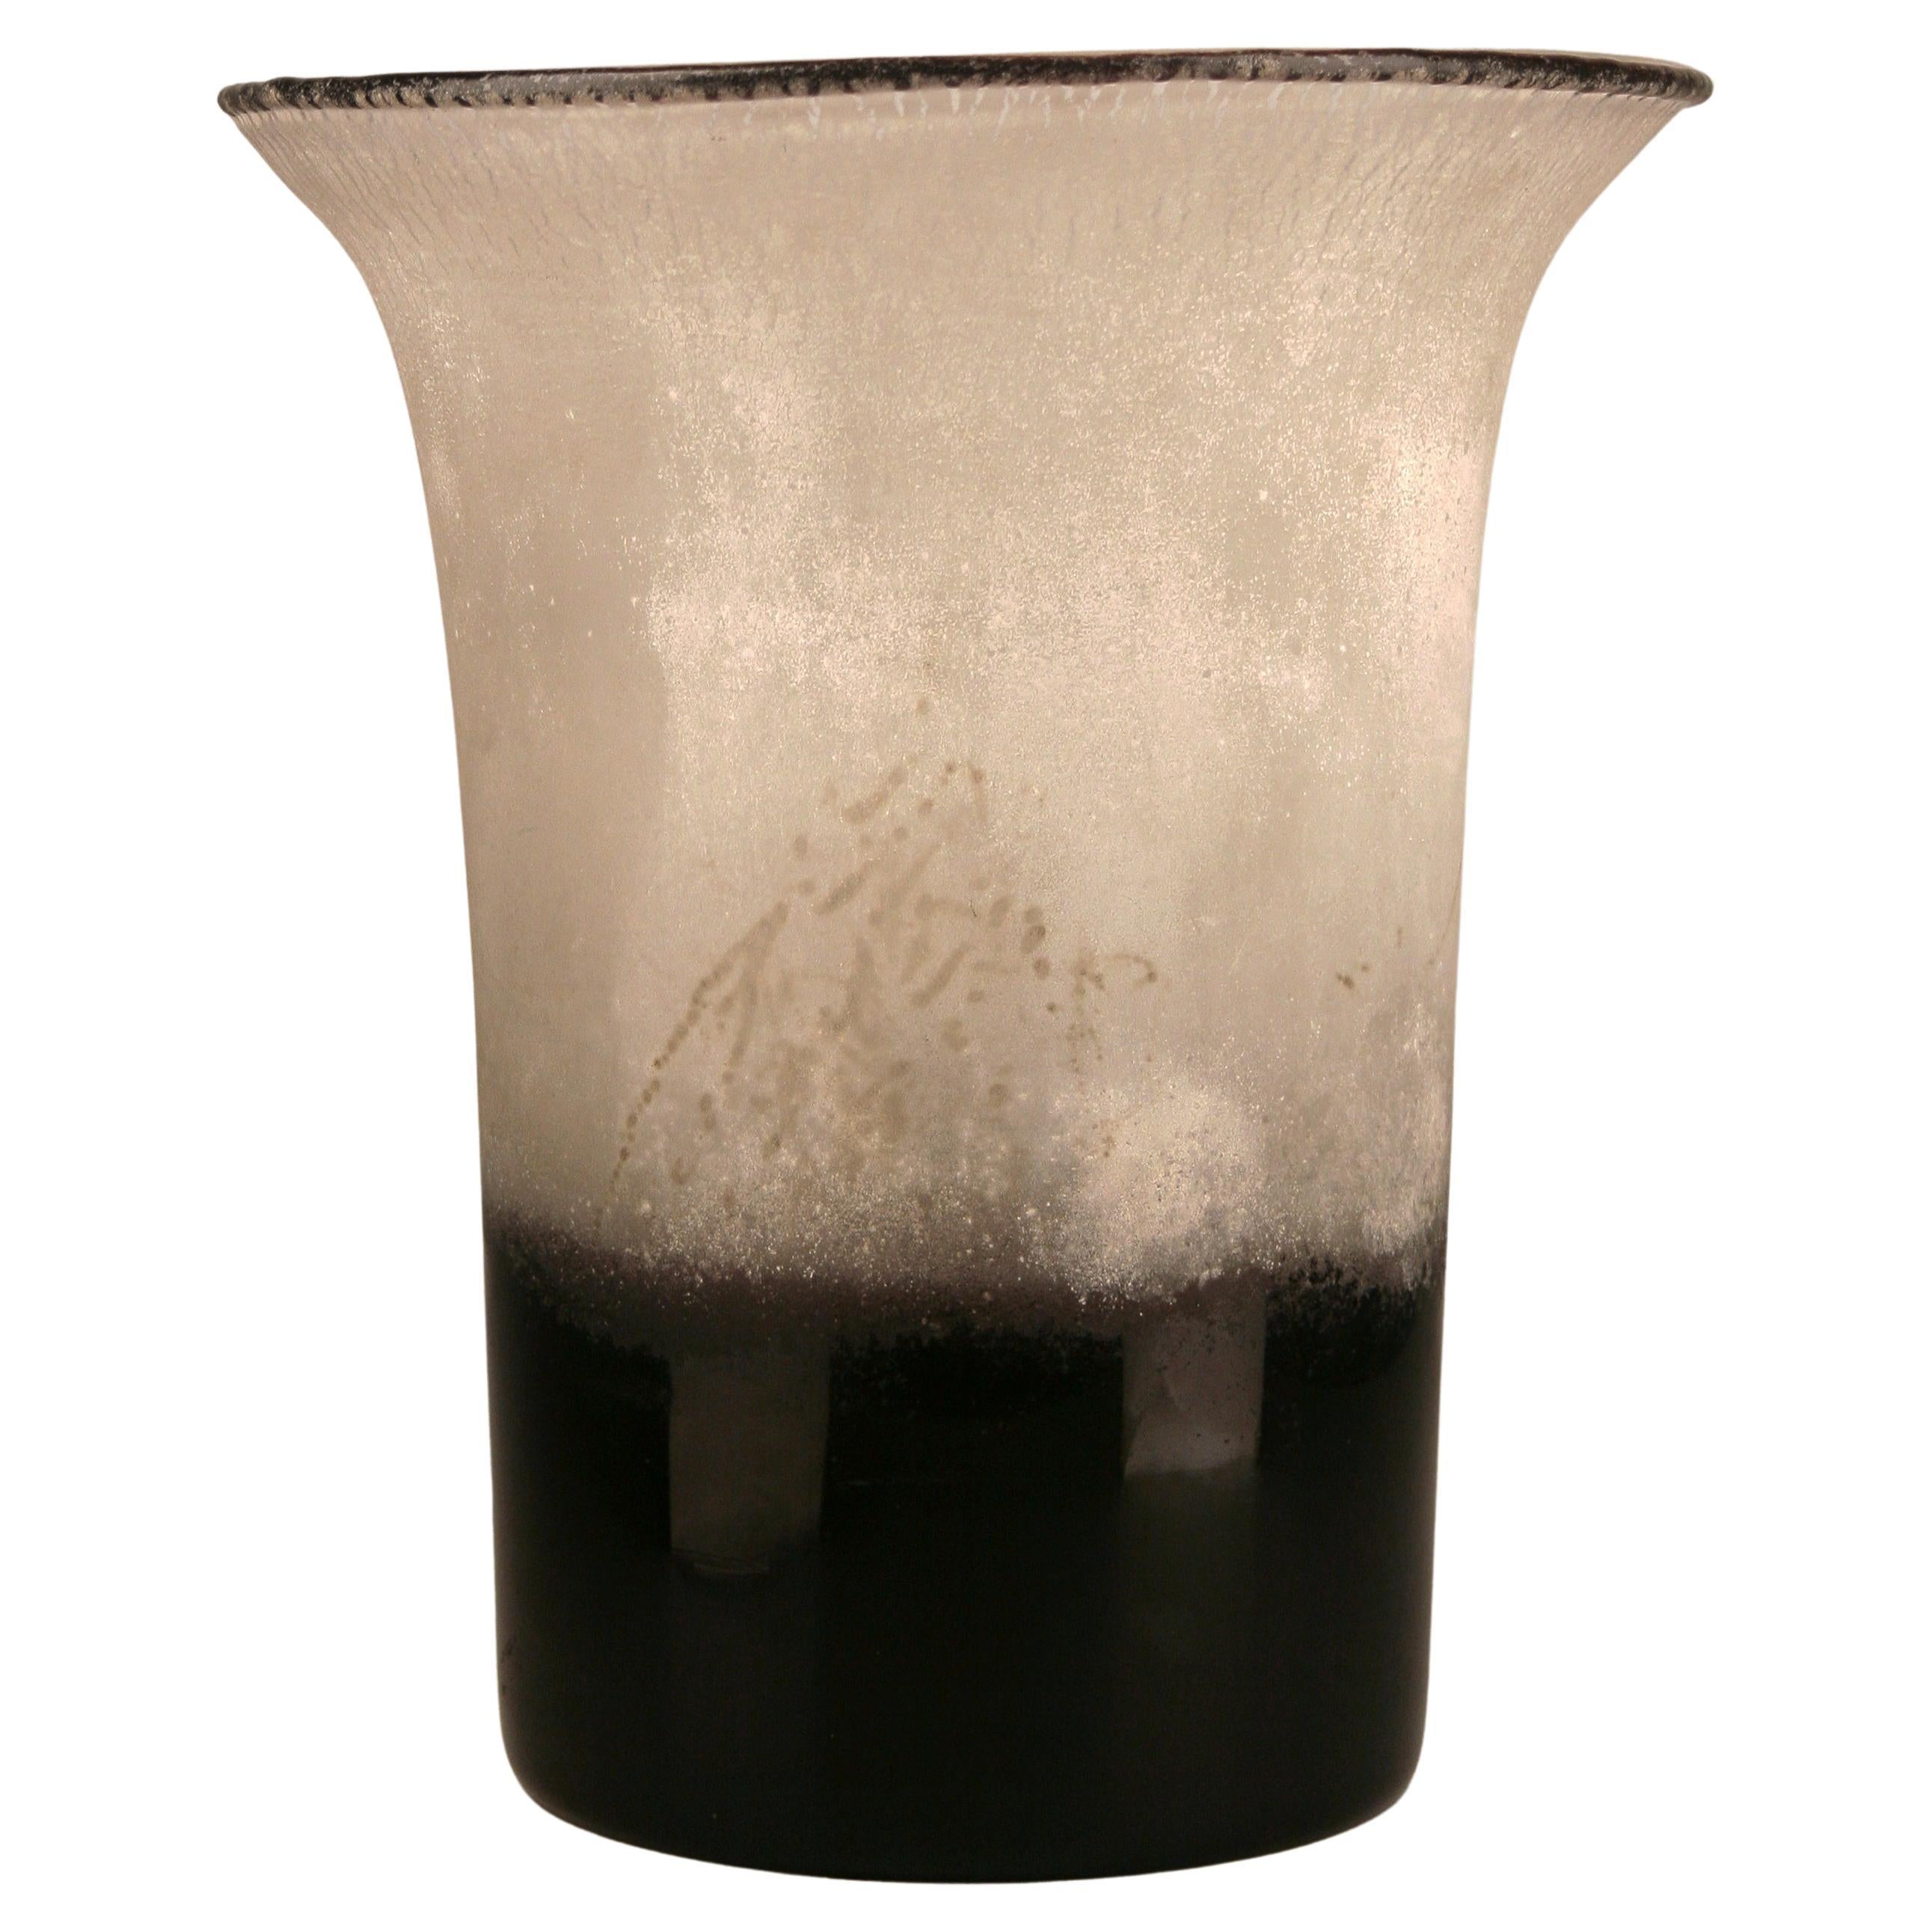 Mid-20th Century Modern Frosted Murano Glass Lamp/Vase by Italian A. Barbini